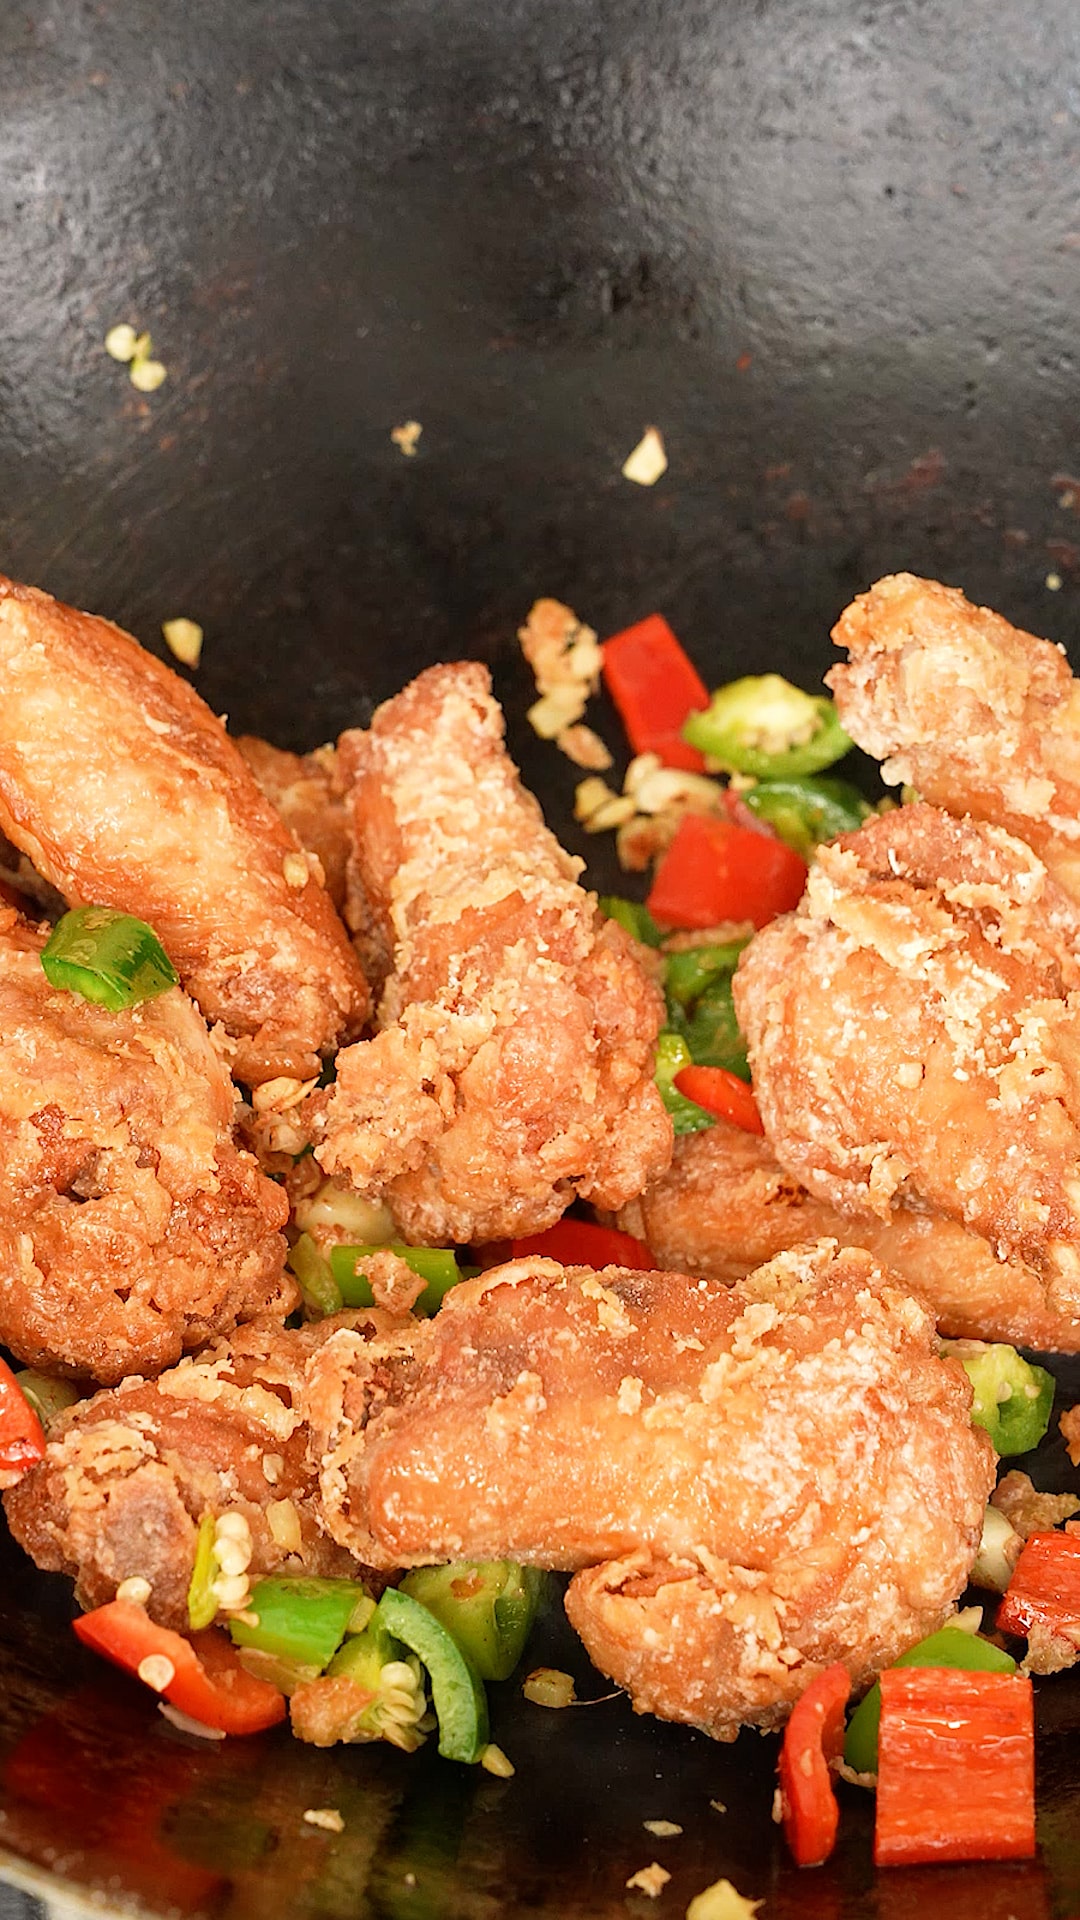 Chicken wings being mixed with peppers in a wok.